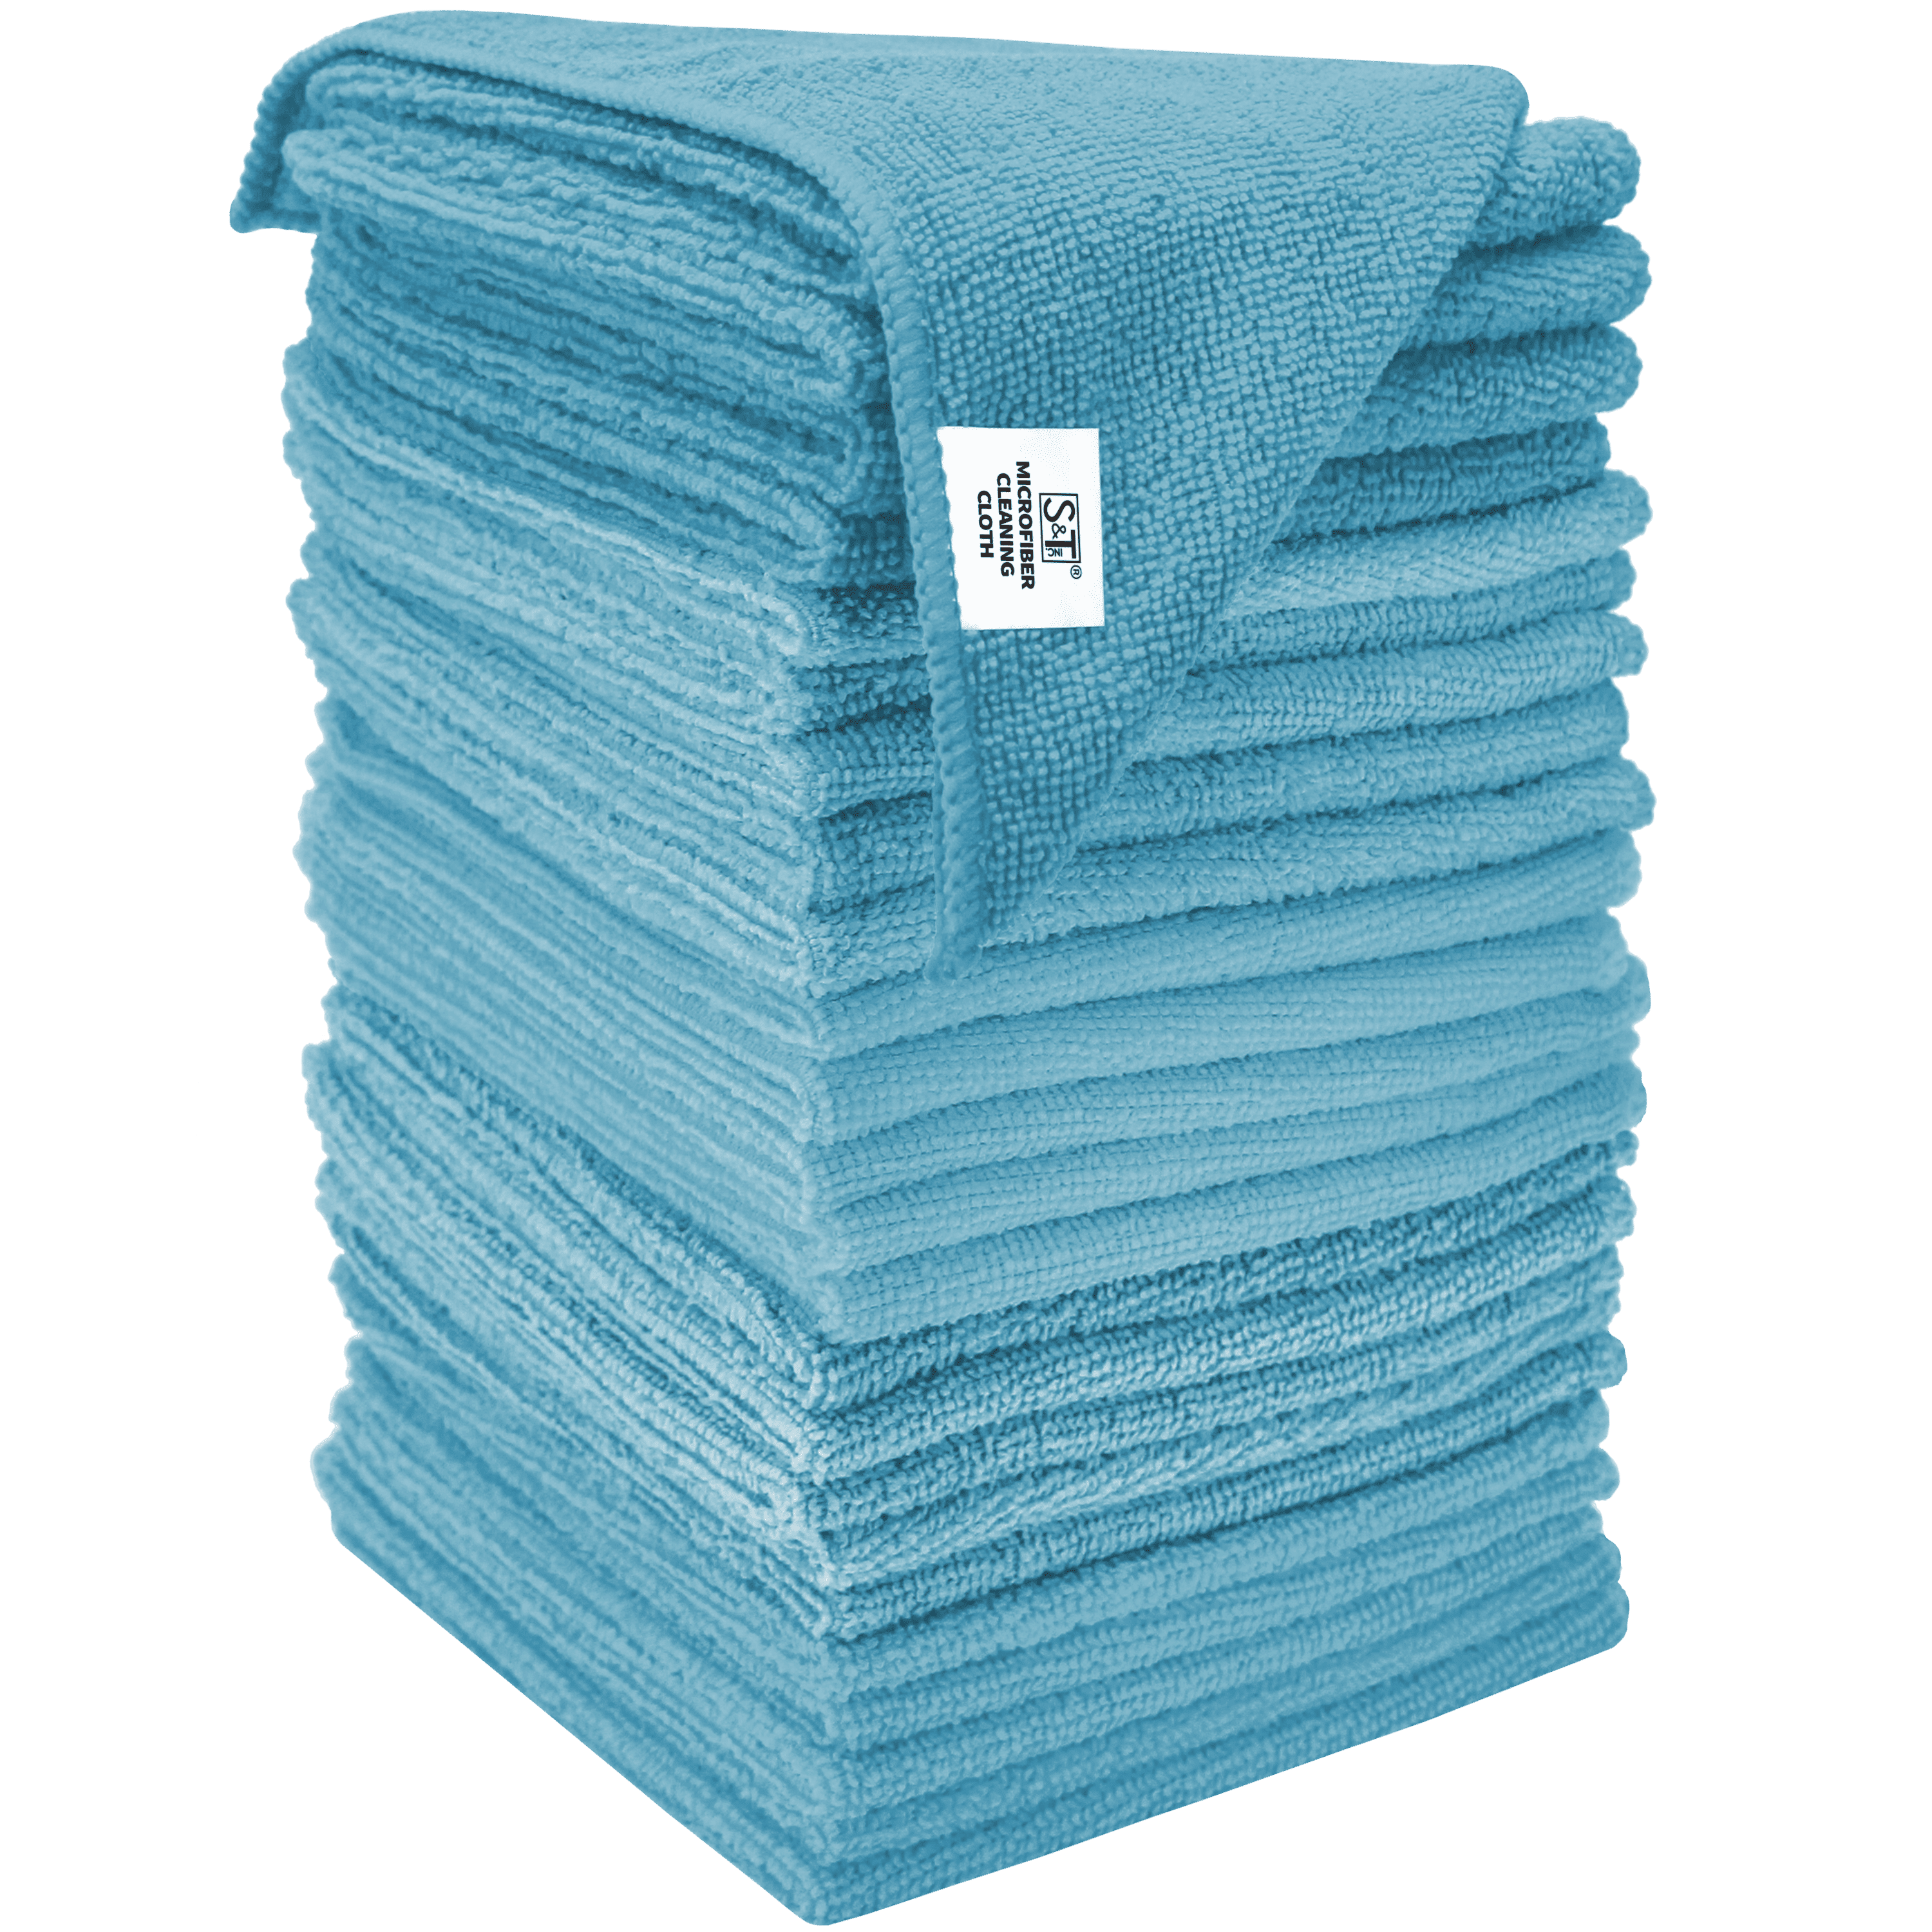 20 pack new microfiber towels cleaning towels plush 16x16 300 gsm lint free blue